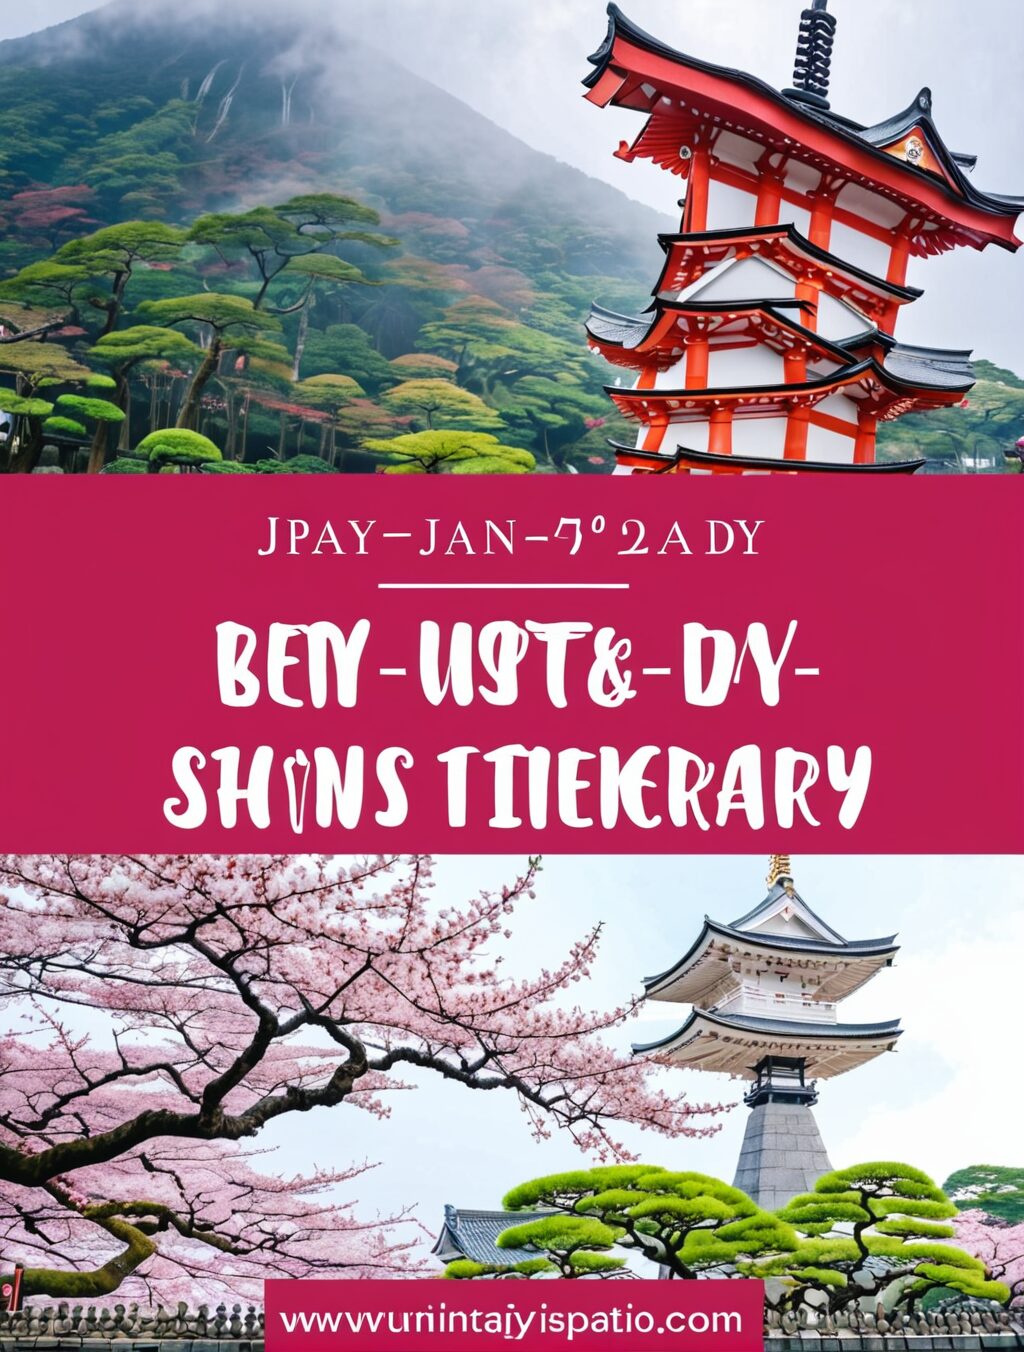 best japan 7 day itinerary